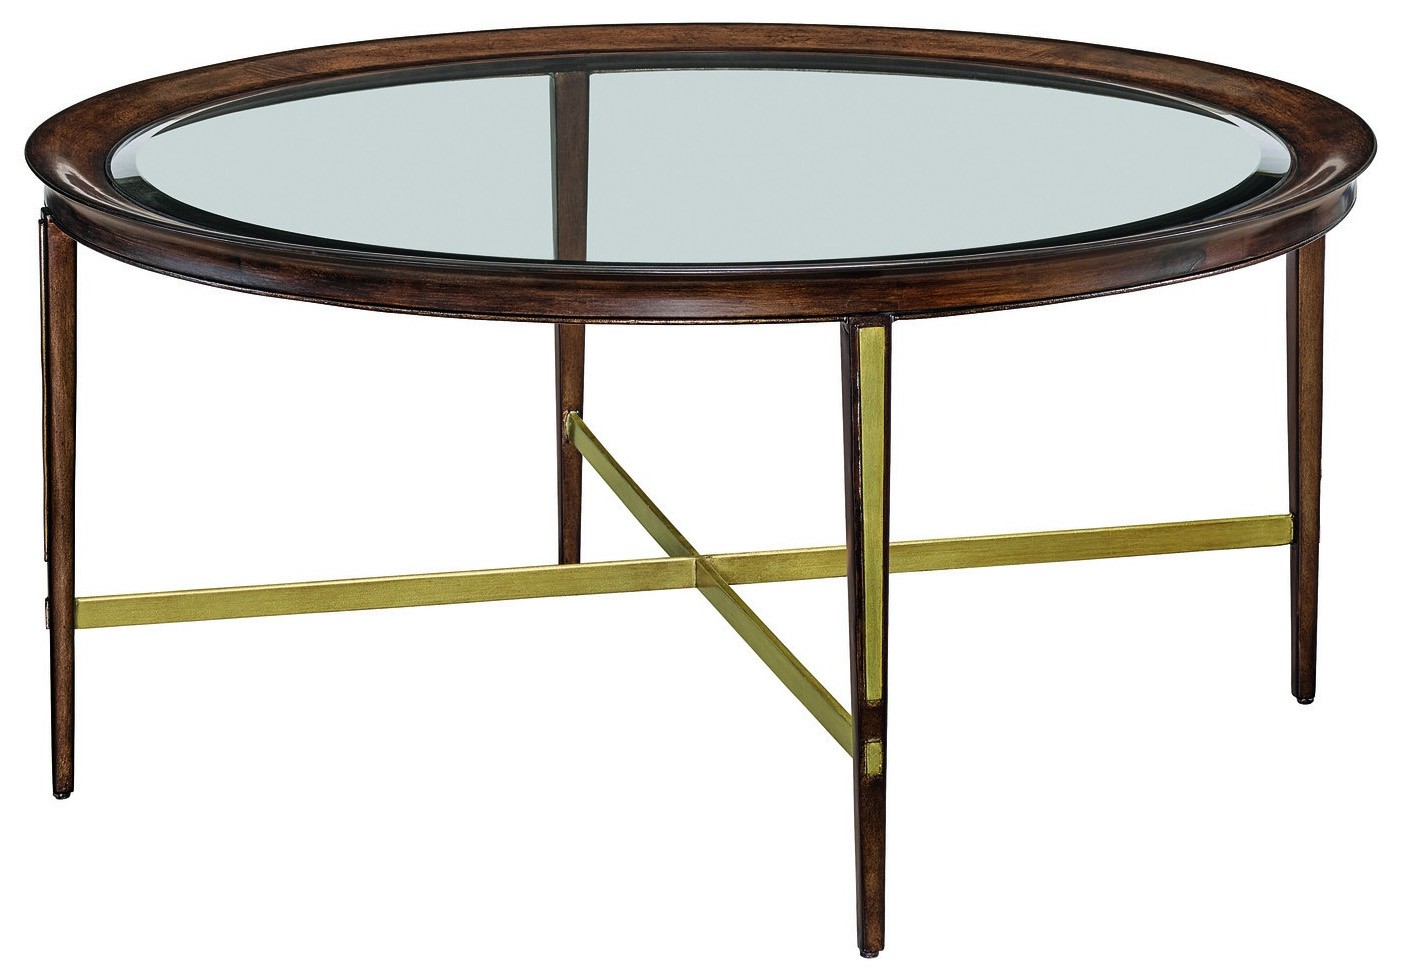 Round and Oval Coffee tables Round glass coffee table from our modern Dakota collection